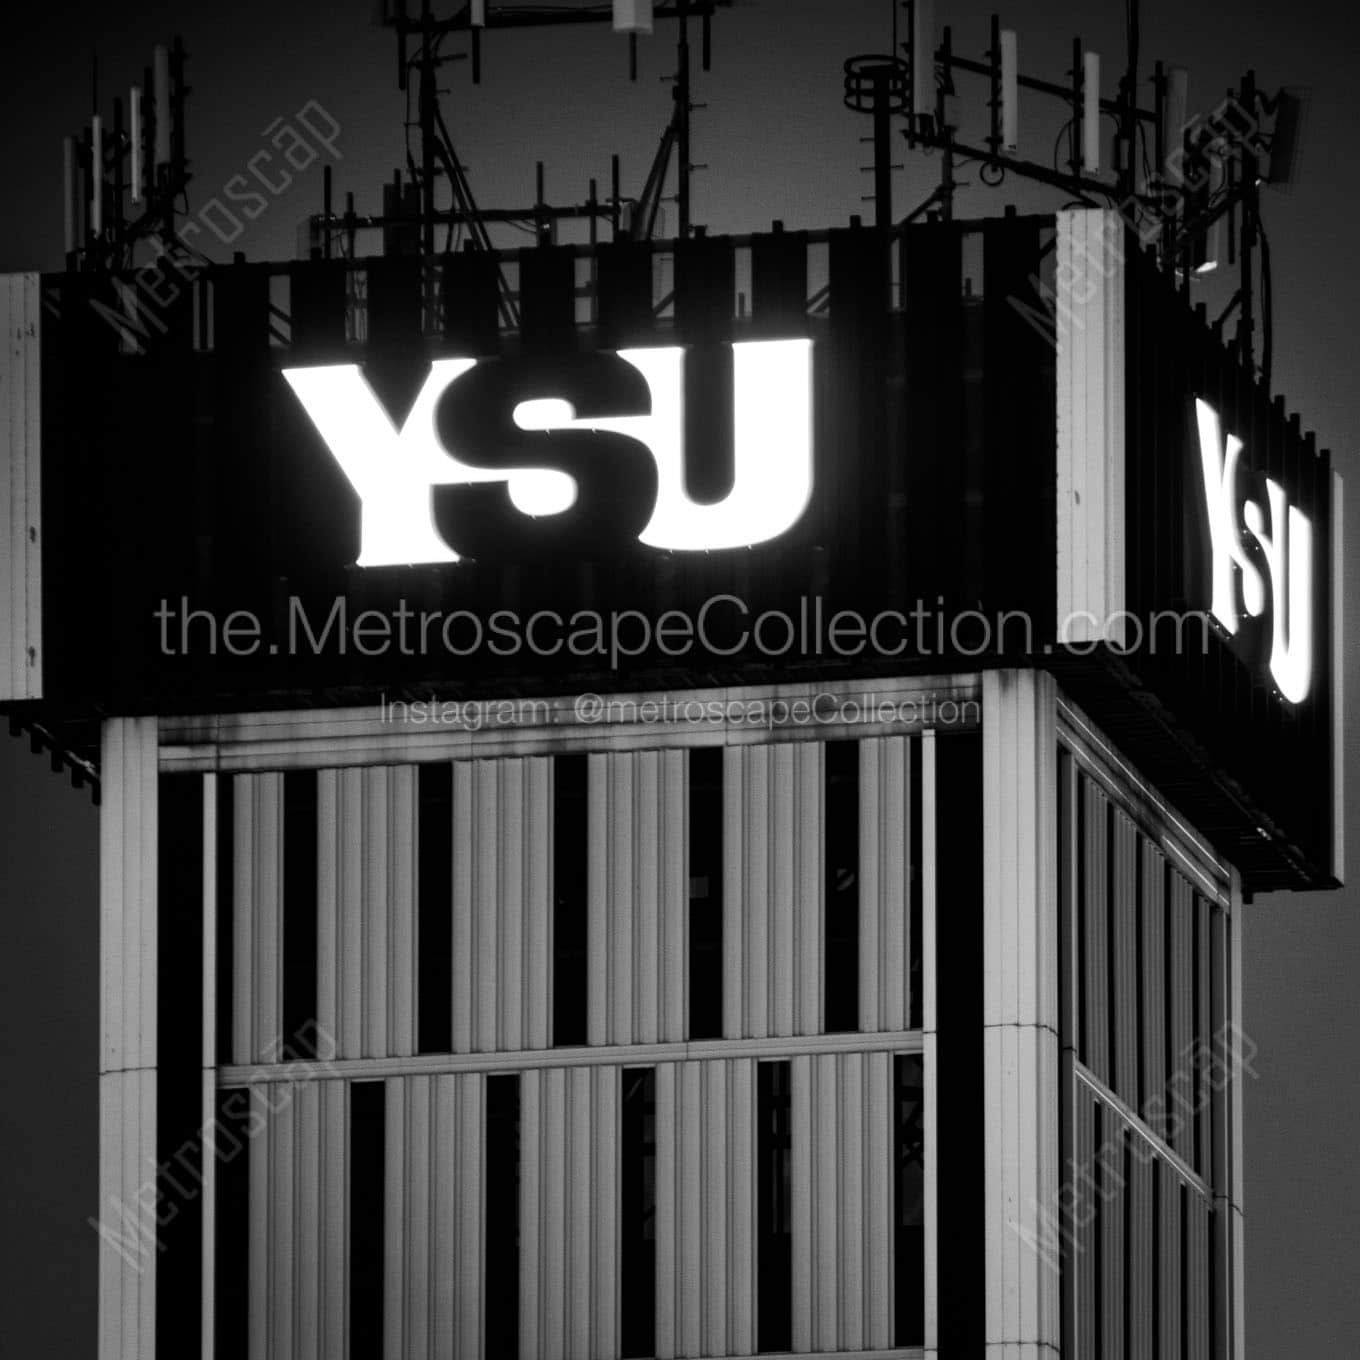 ysu tower youngstown state campus Black & White Office Art